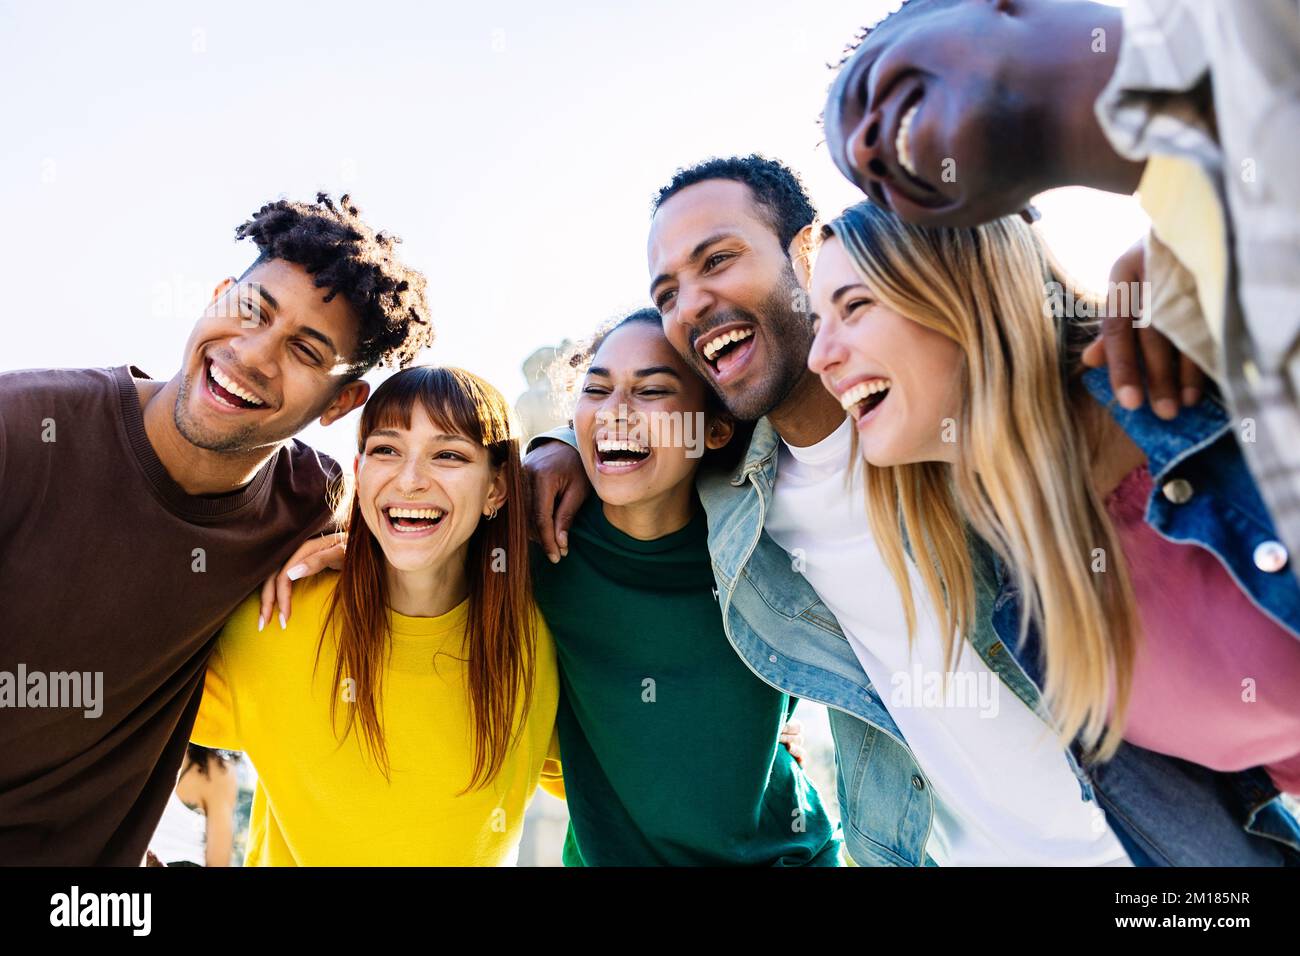 United group of young friends having fun together. Stock Photo